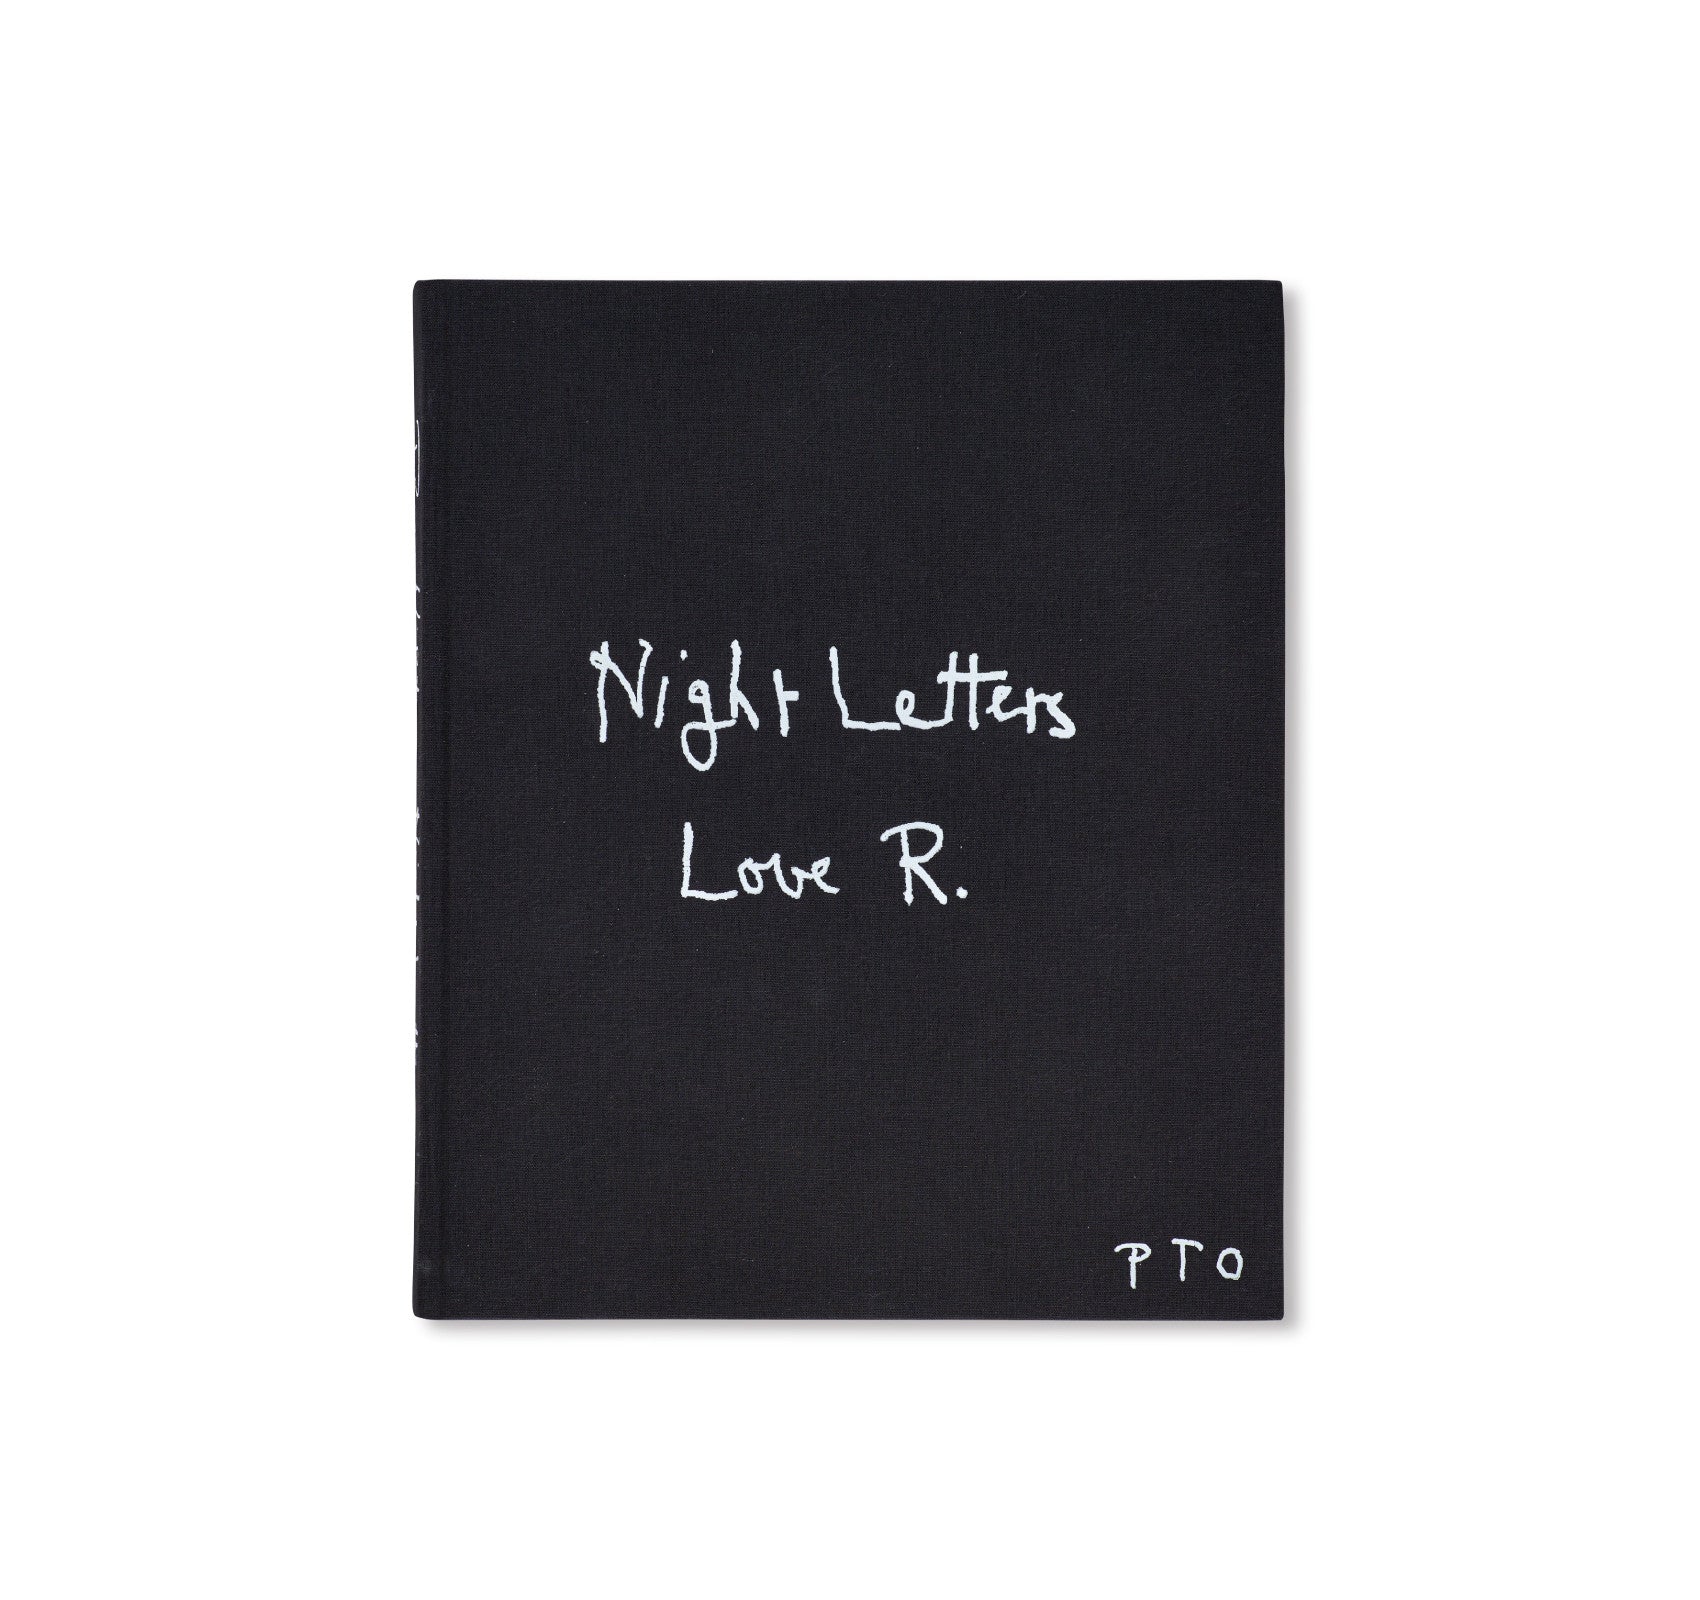 ROGER HILTON - NIGHT LETTERS by Timothy Bond